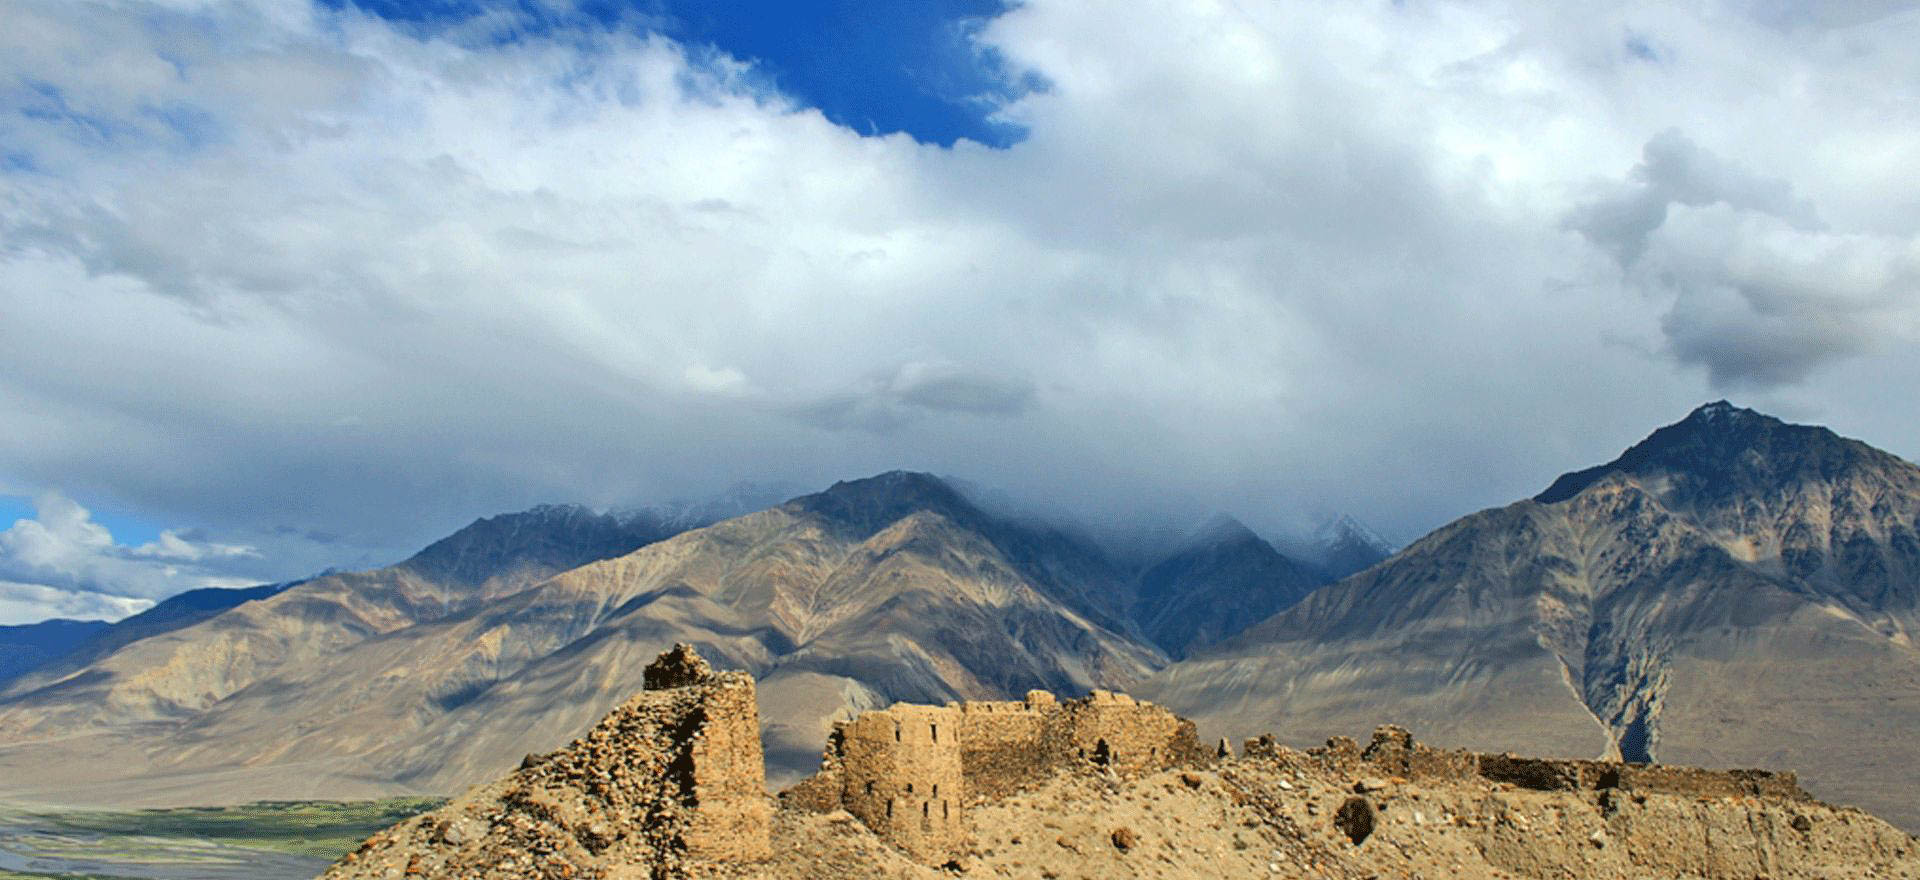 Ruined fort on the Pamir Highway - Tajikistan Holidays and Tours